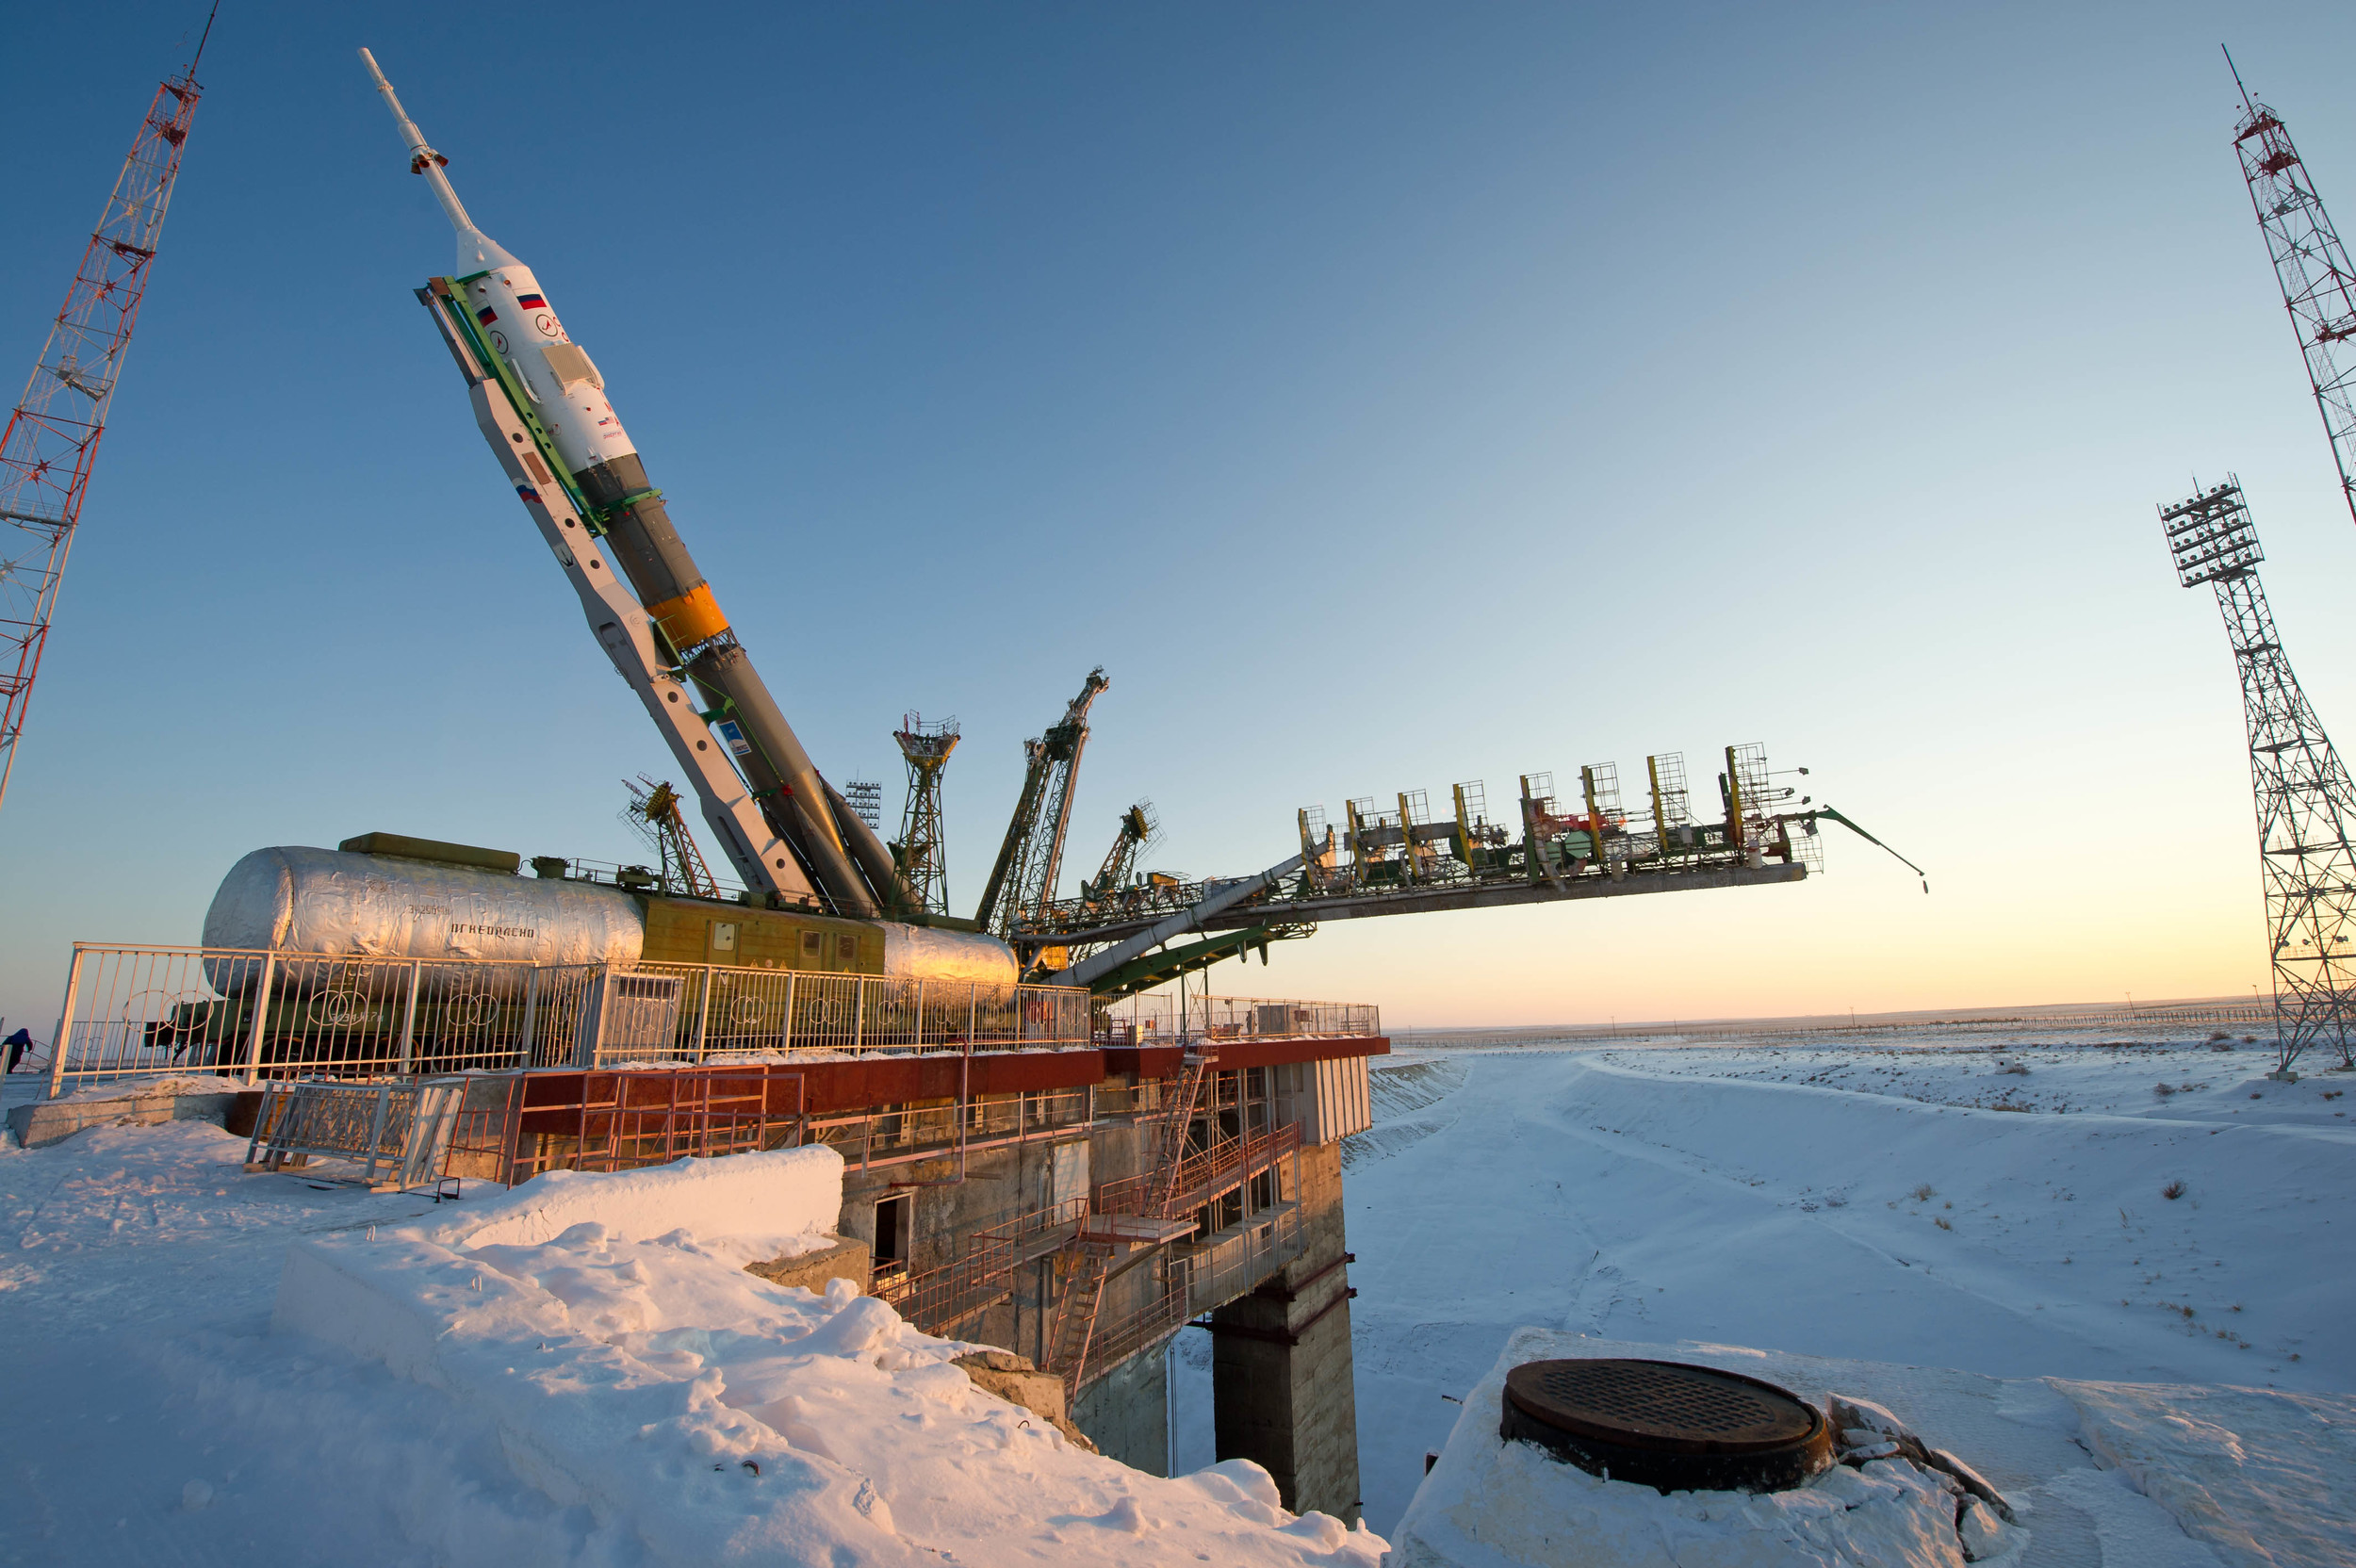  The Soyuz TMA-03M spacecraft is lifted on to the launch pad at the Baikonur Cosmodrome in Kazakhstan, Monday, Dec. 19, 2011. The rocket is being prepared for launch on December 21 to carry the crew of Expedition 30 to the International Space Station